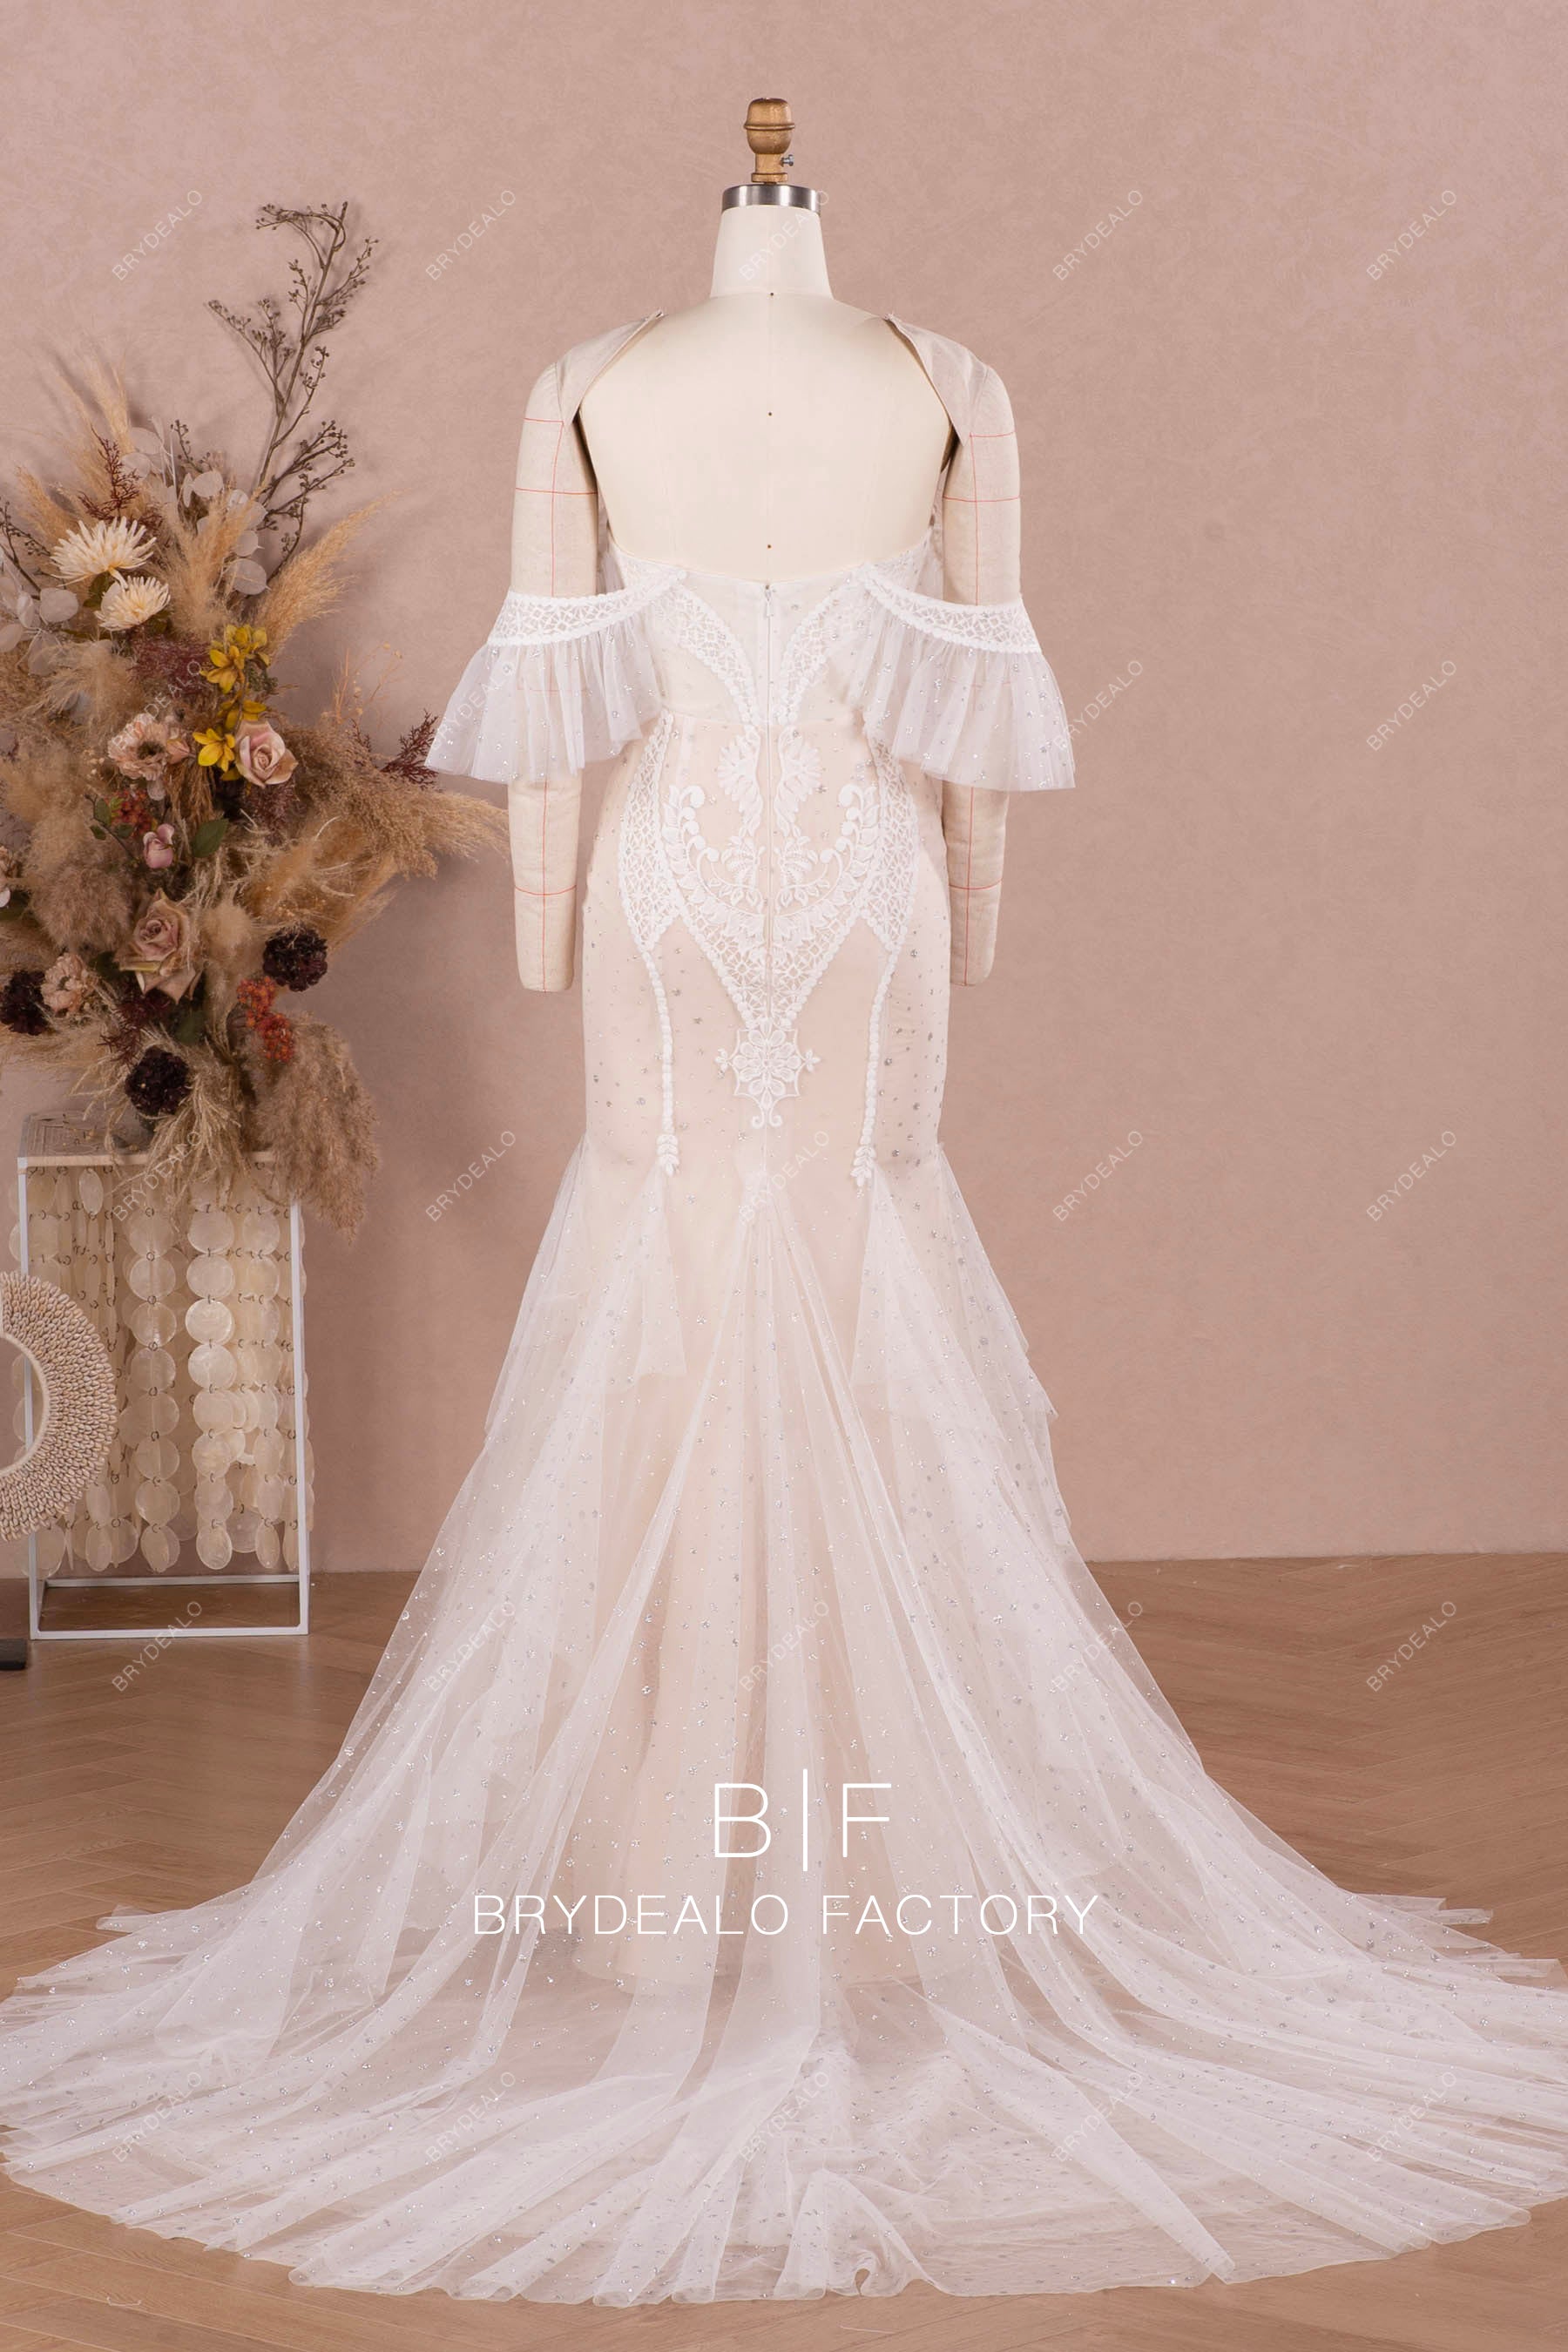 Off Shoulder Wedding Dress With Ruffle, Lace Bodice and Tulle